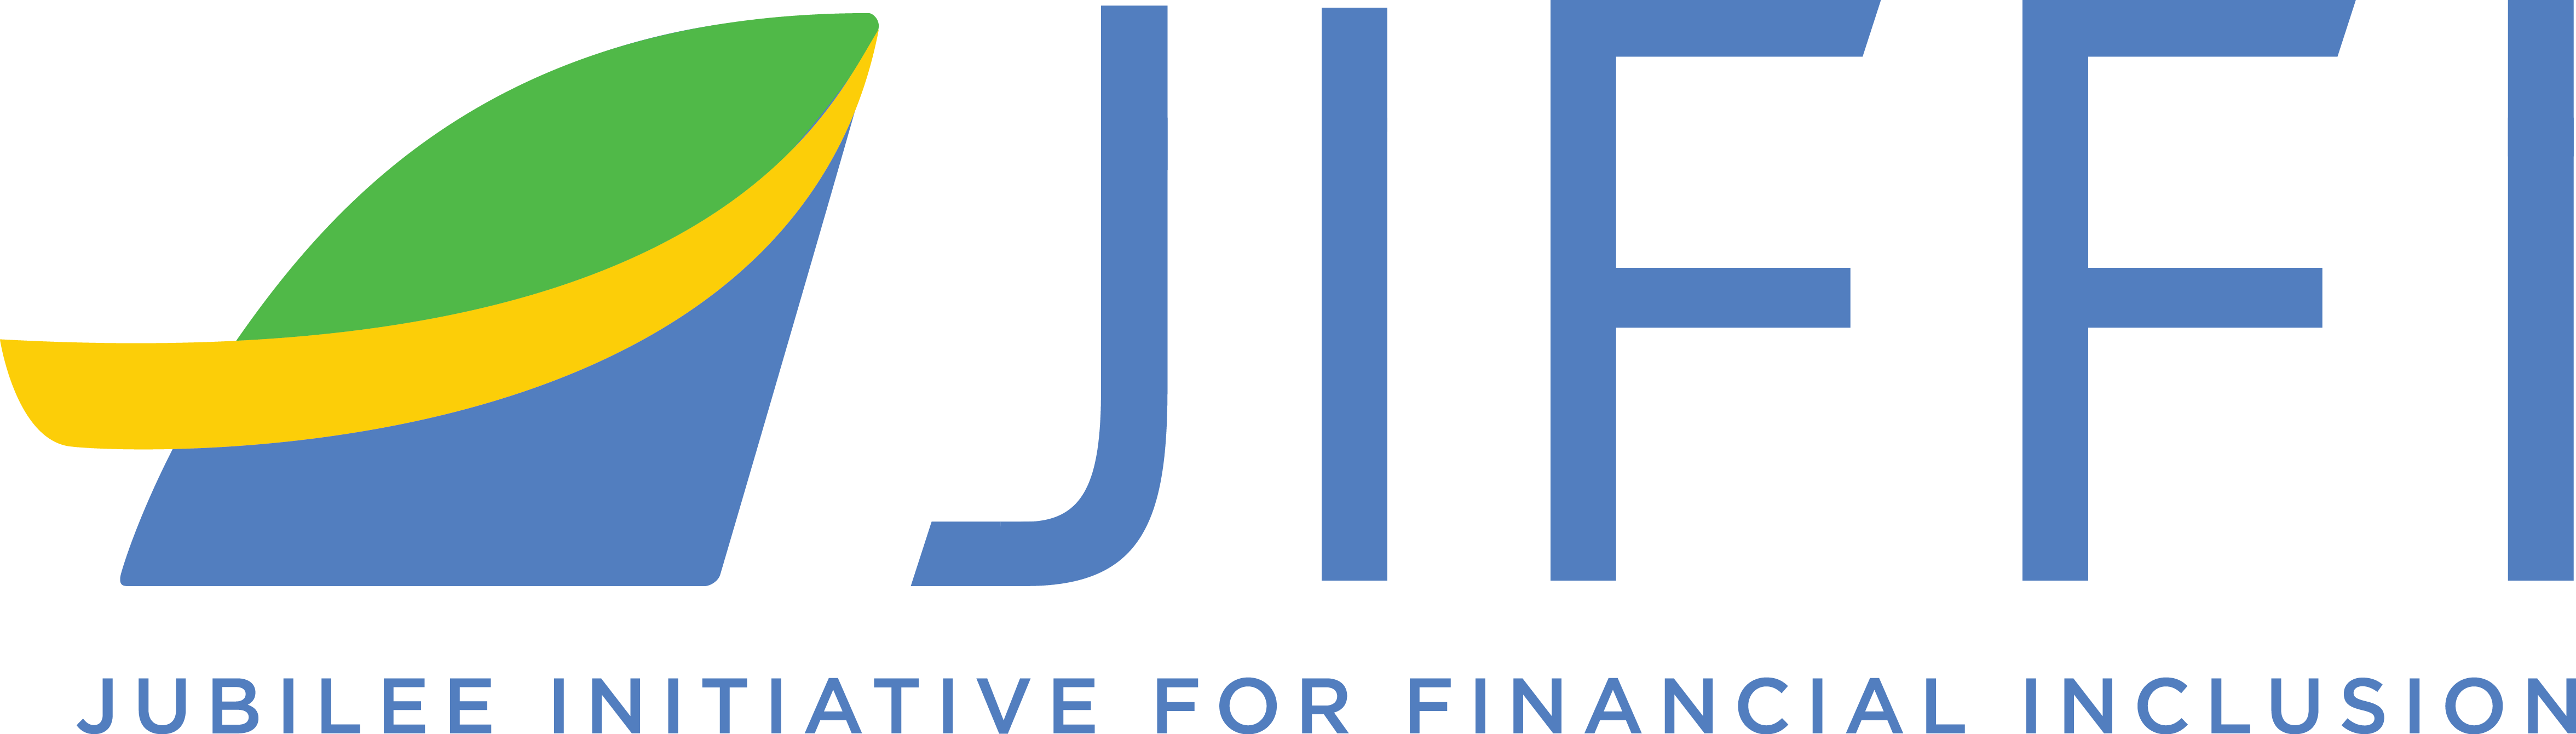 The Jubilee Initiative for Financial Inclusion